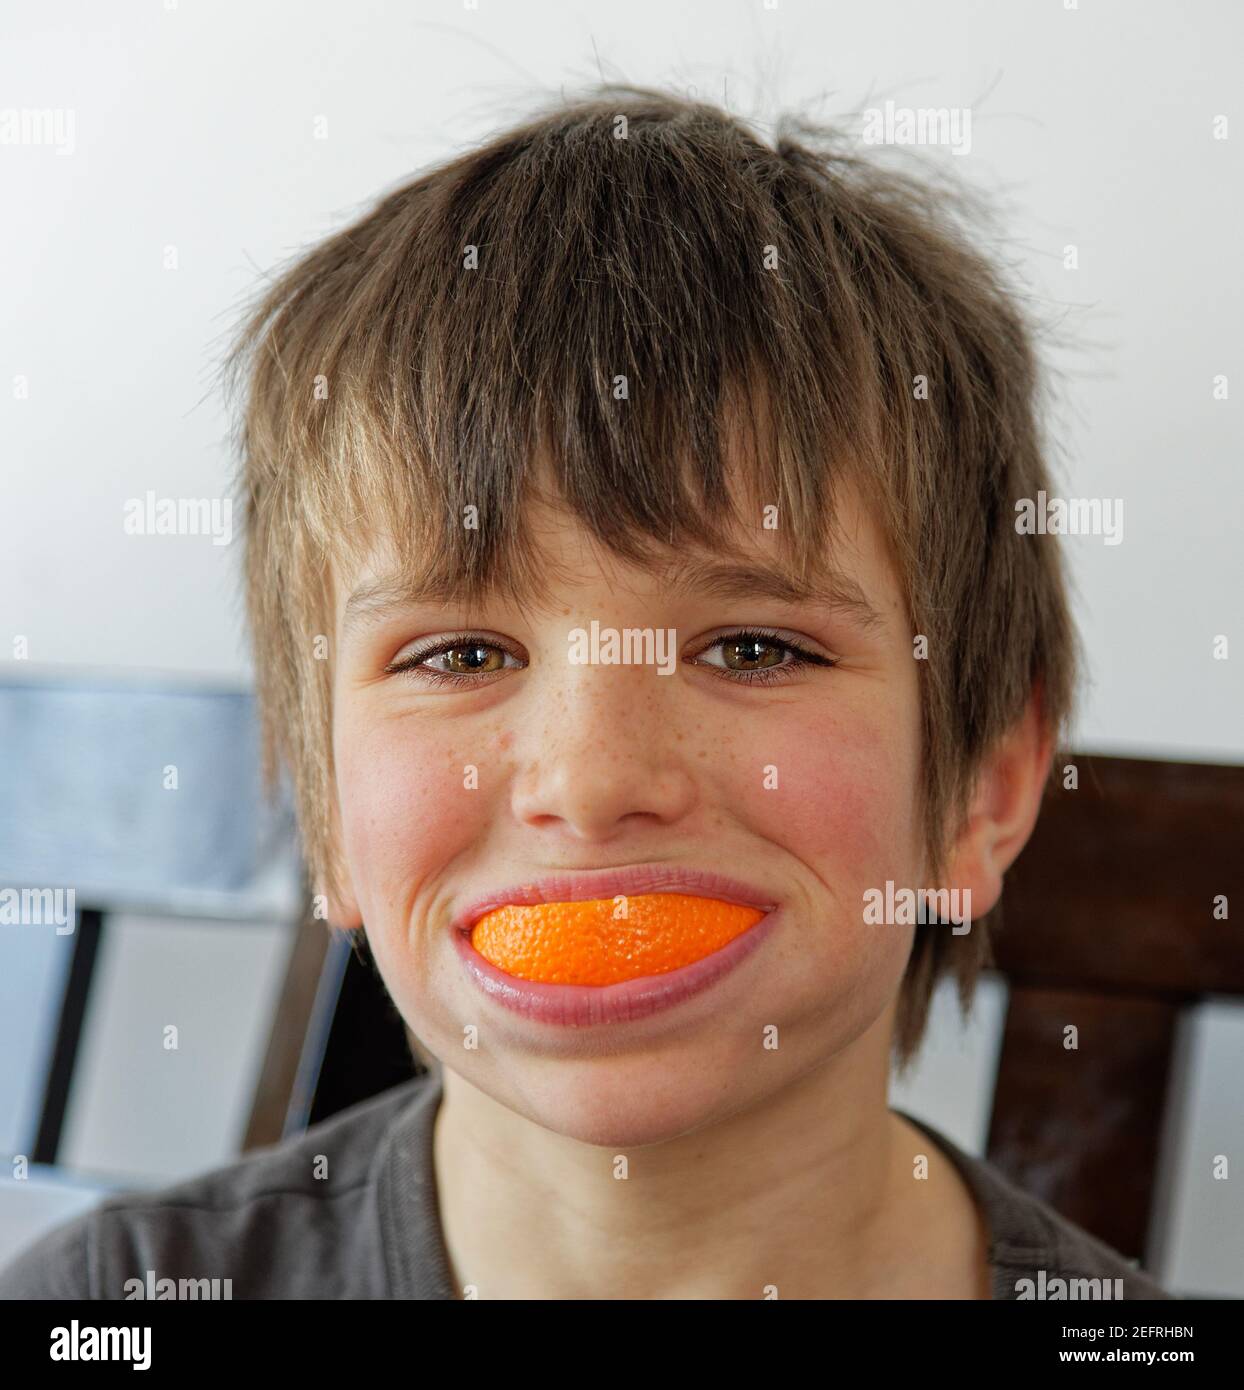 A young boy (8 yr old) with an orange peel smile Stock Photo